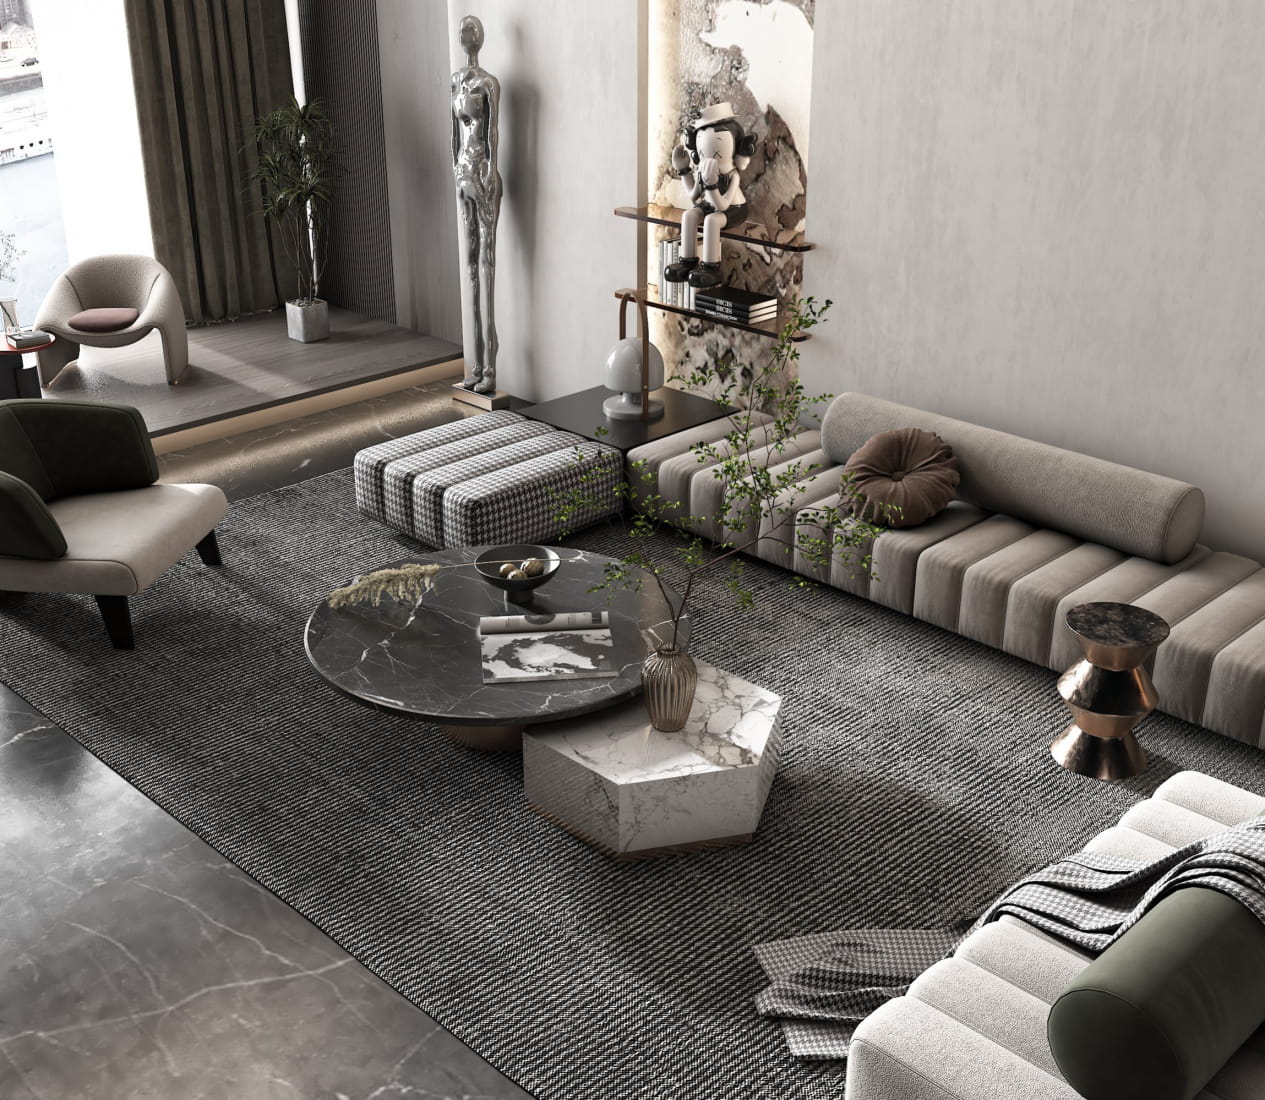 living-room-rendering-student-project